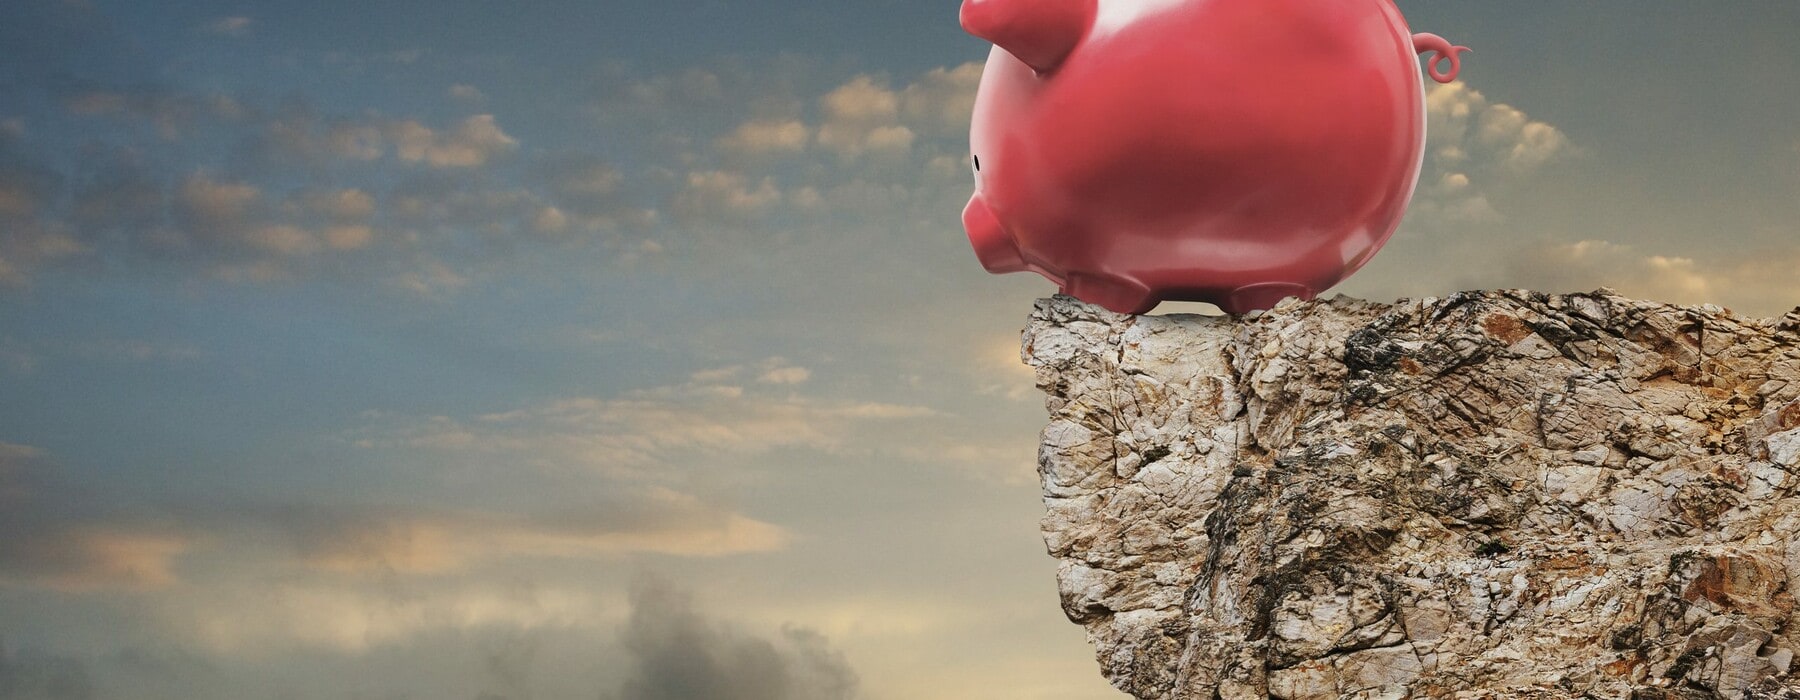 A piggy bank stands at the edge of a cliff and looks over in an image about investment decisions, risk, and challenge.